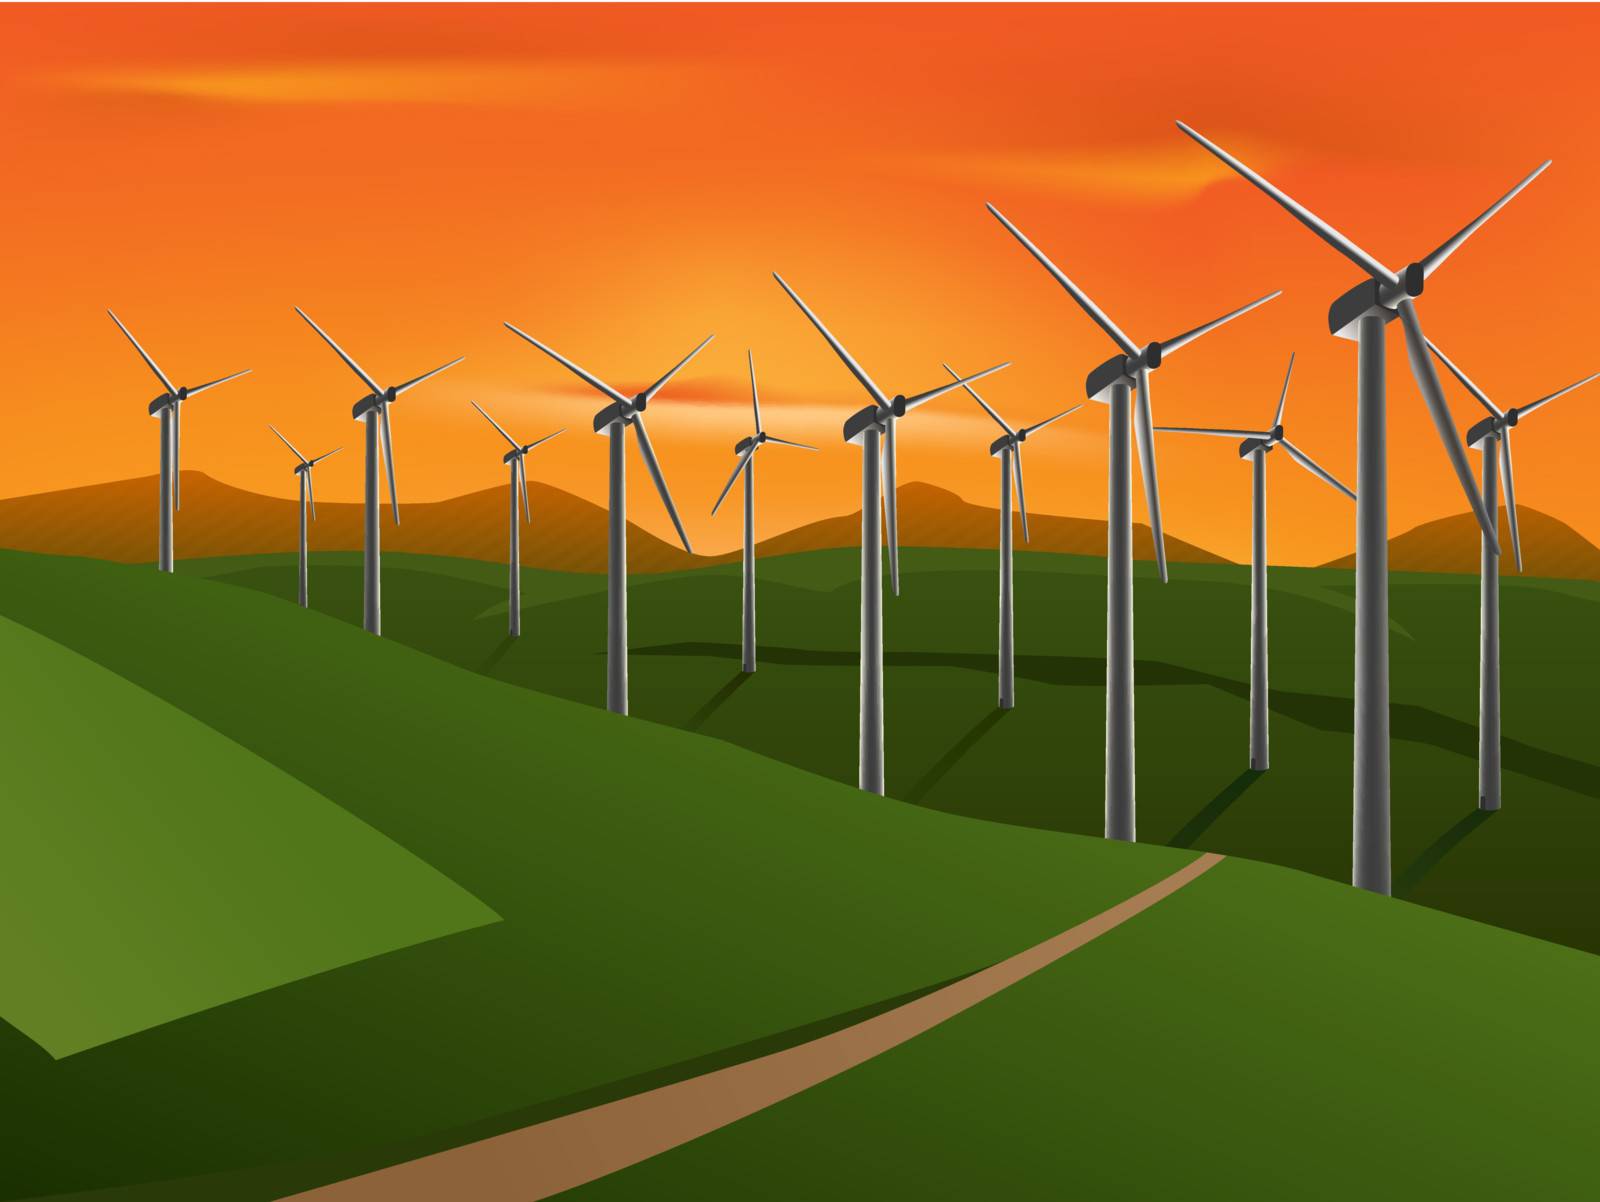 vector illustration of wind turbine on the green fields in the sunset